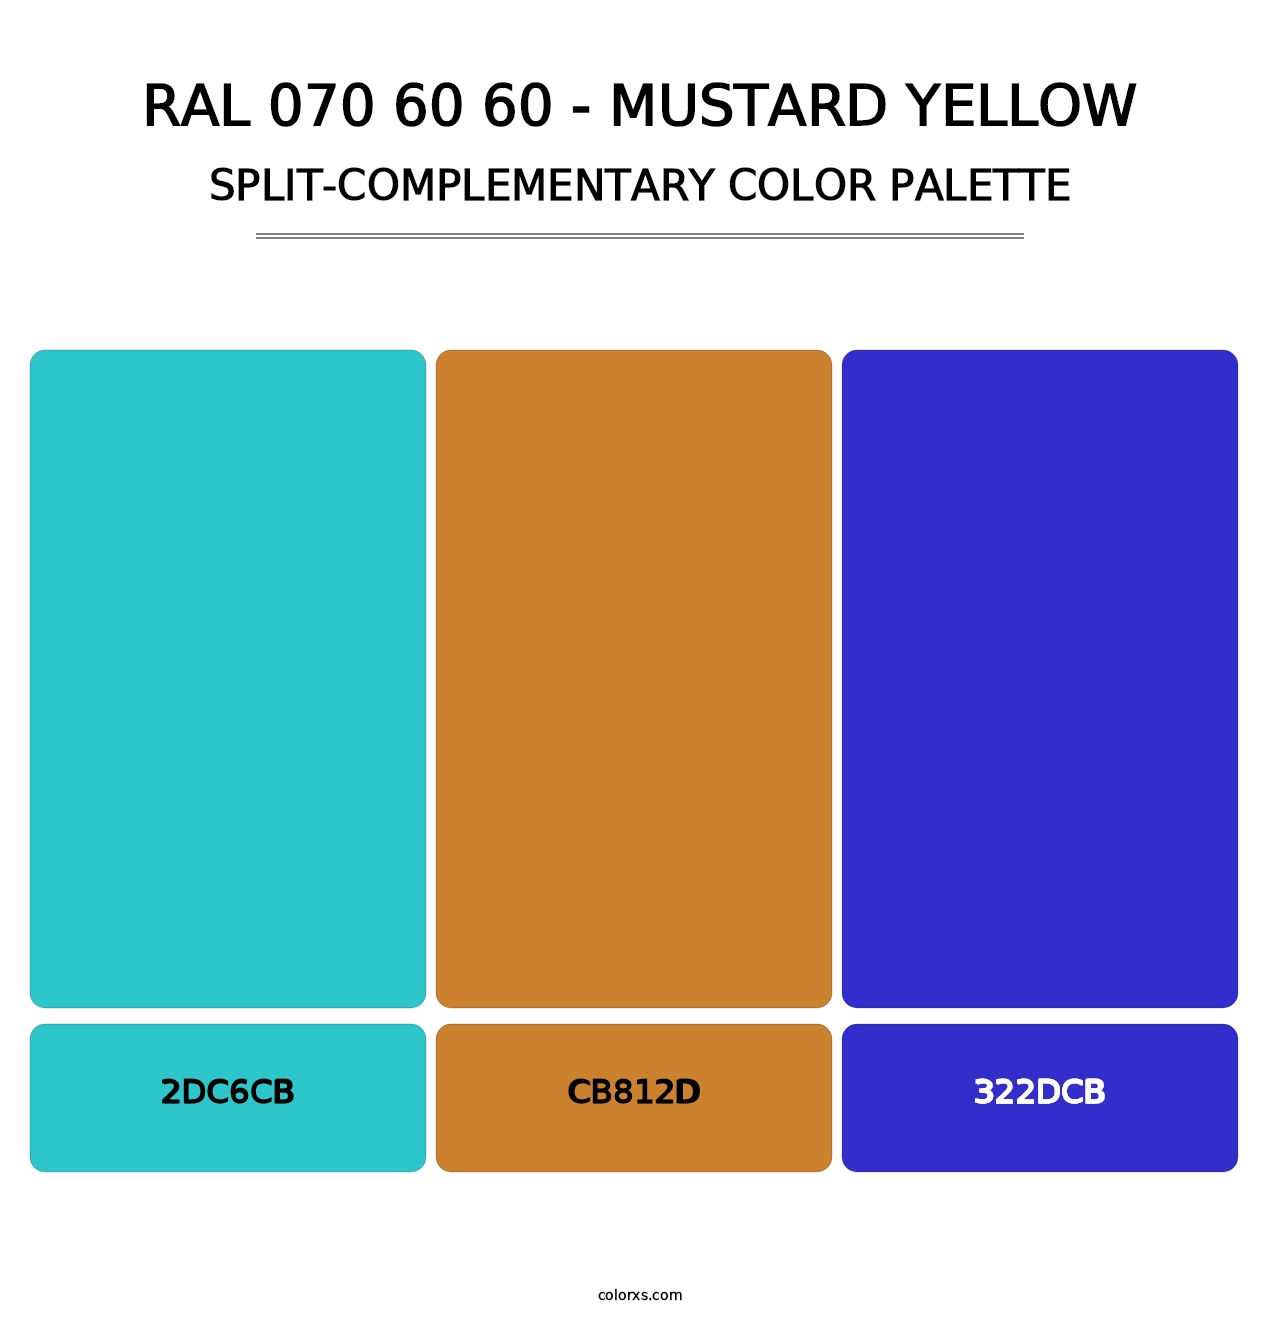 RAL 070 60 60 - Mustard Yellow - Split-Complementary Color Palette